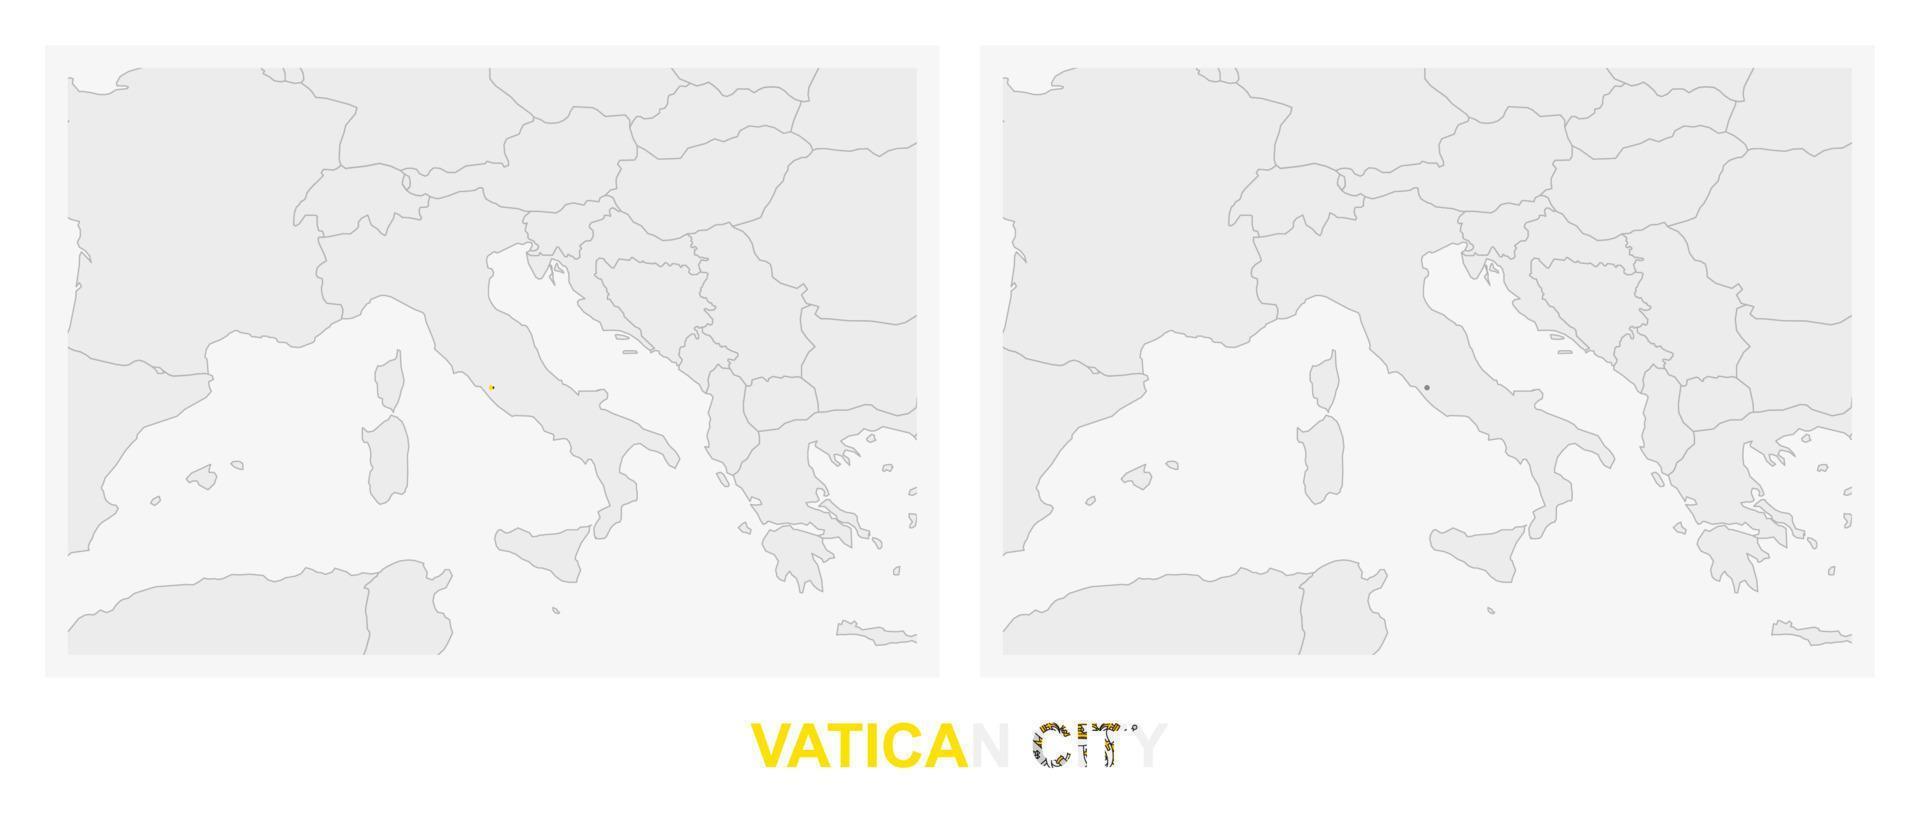 Two versions of the map of Vatican City, with the flag of Vatican City and highlighted in dark grey. vector